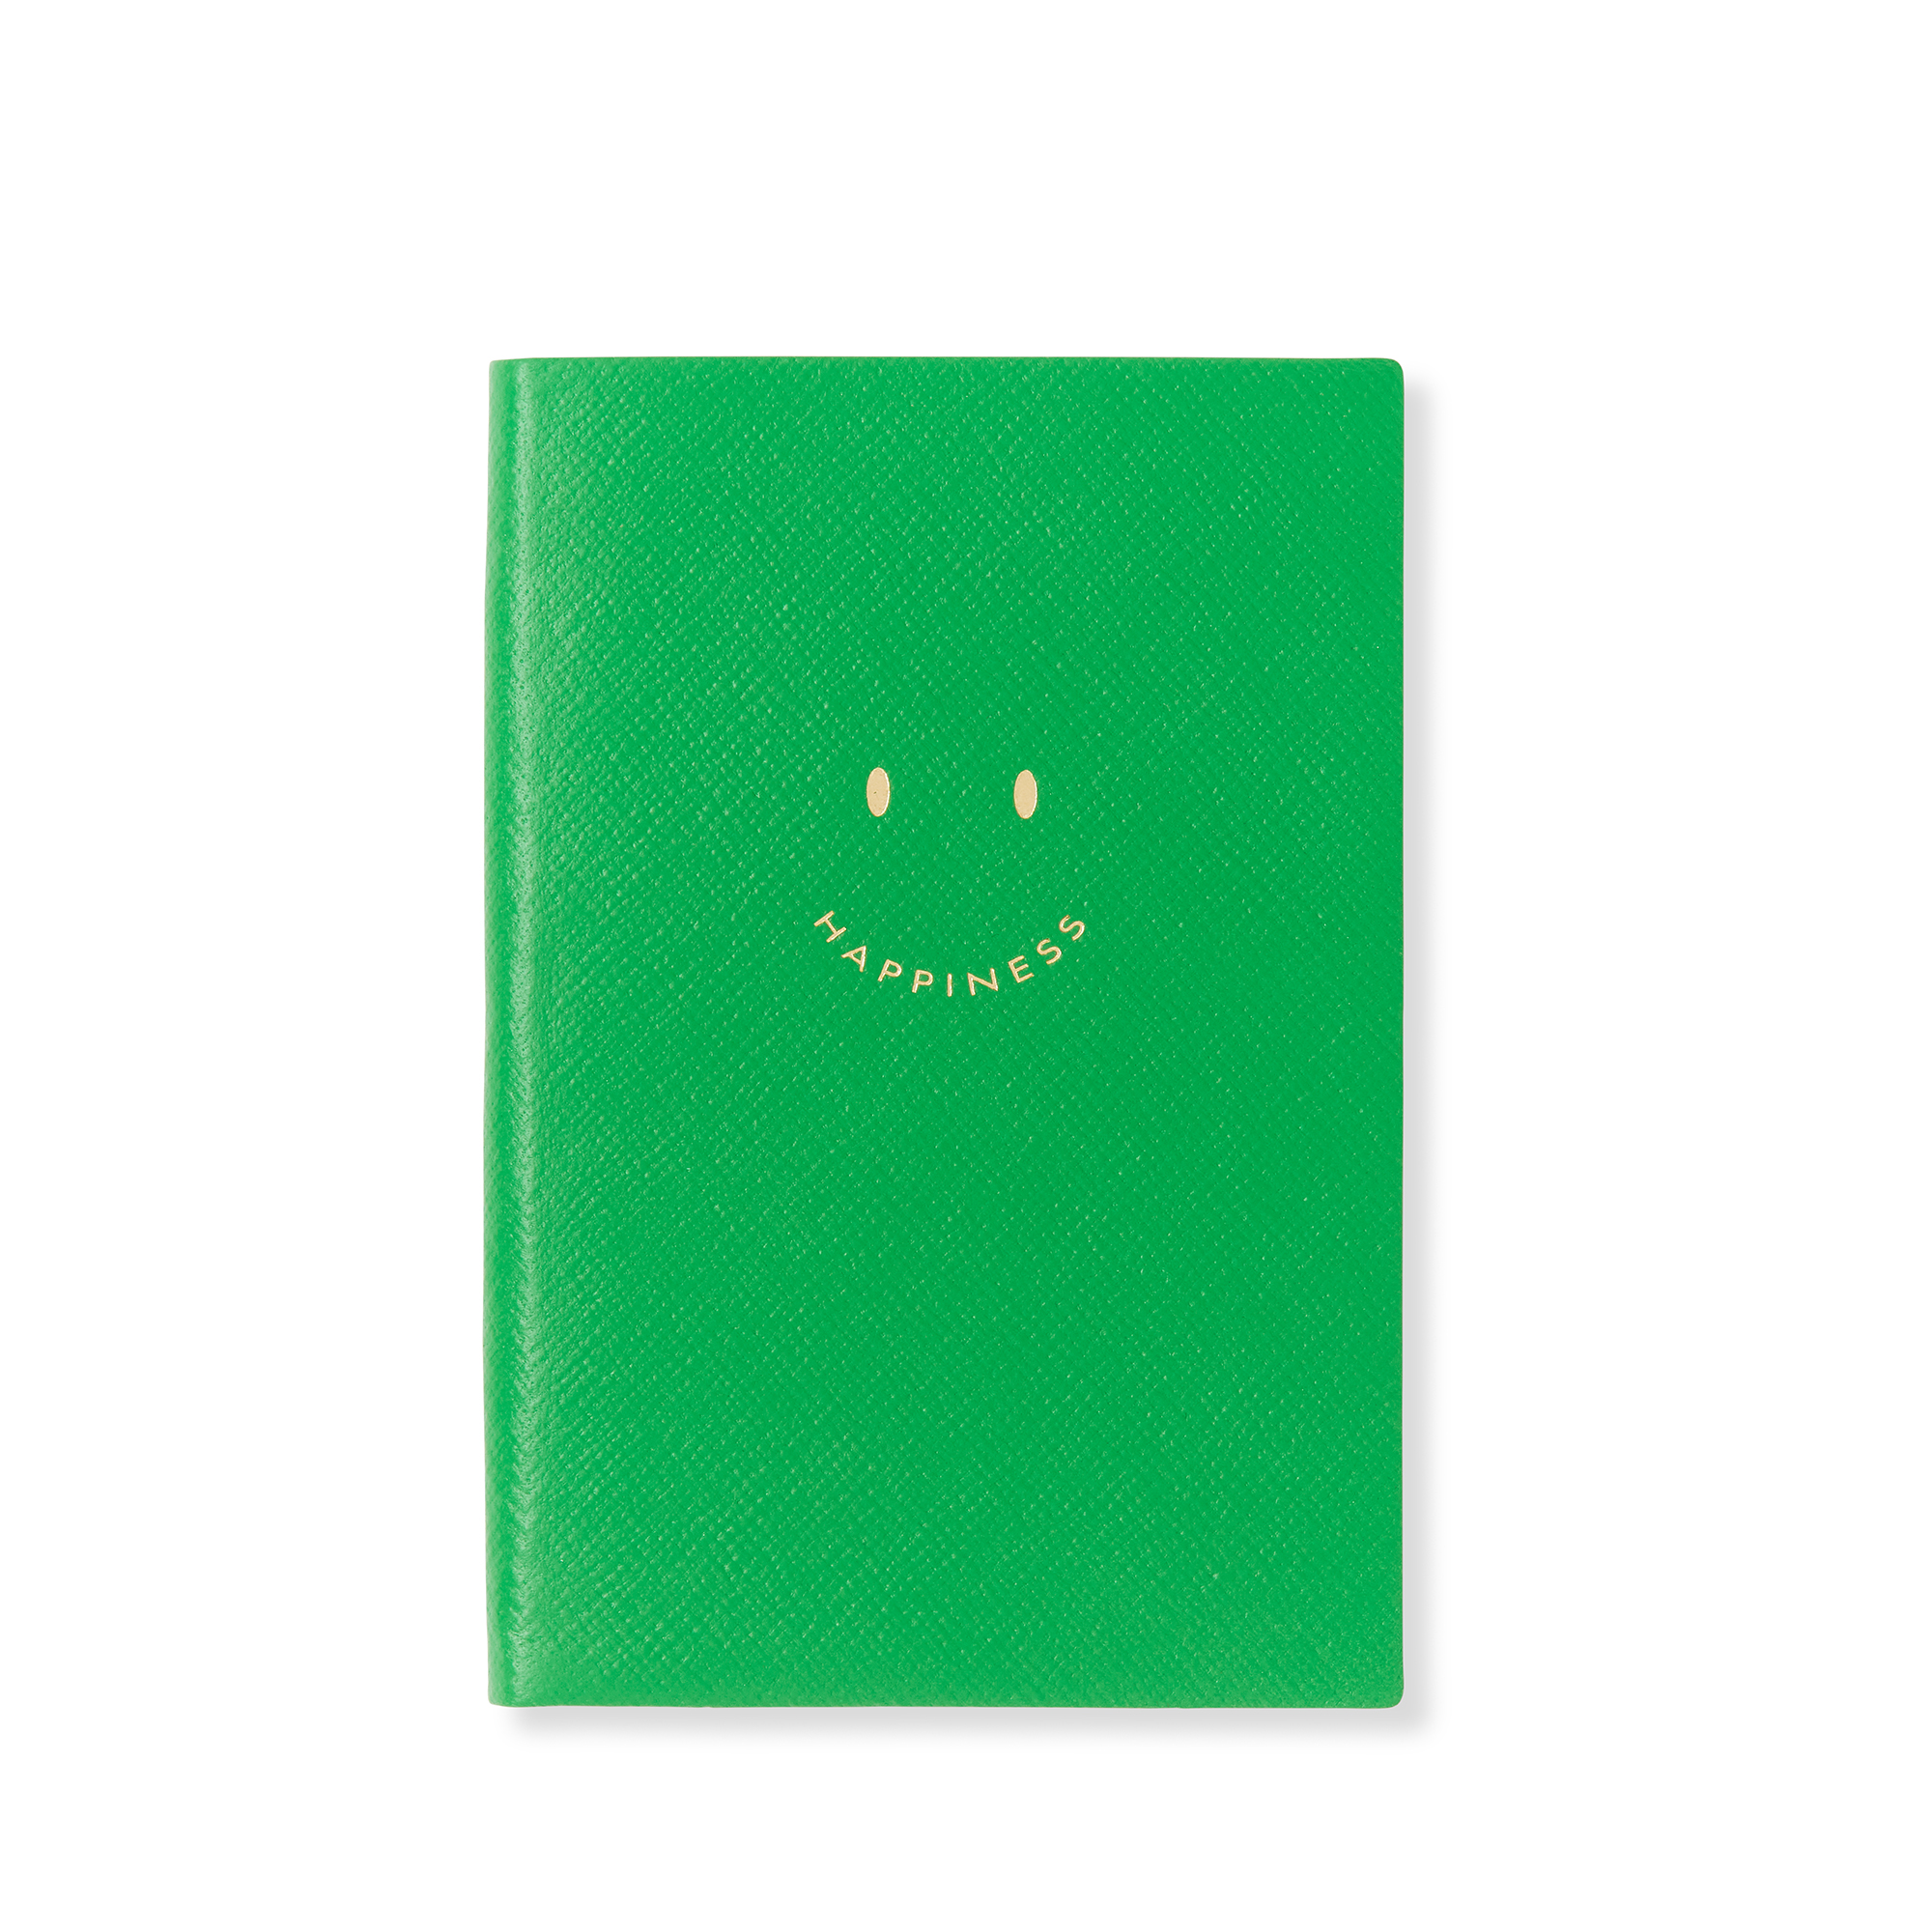 Smythson Happiness Chelsea Notebook In Panama In Bright Emerald